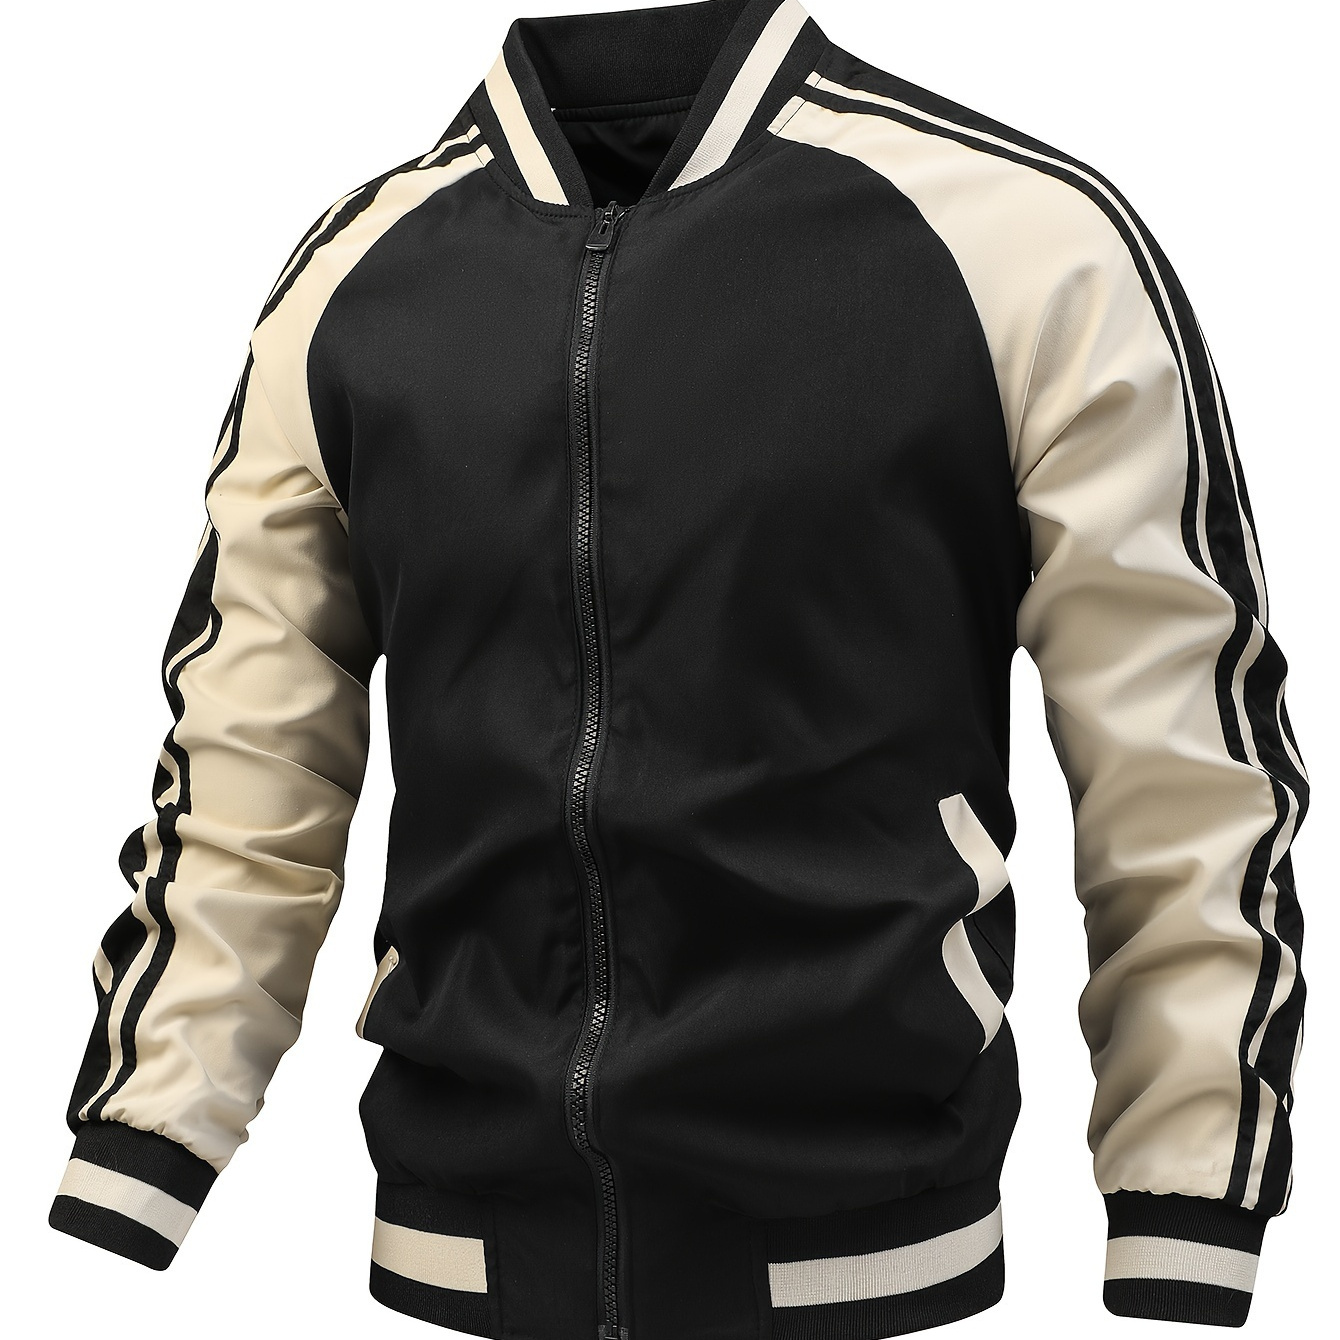 

Men's Color Block Graphic Sports Jacket, Casual Striped Zip Up Varsity Jacket For Outdoor Fall Winter